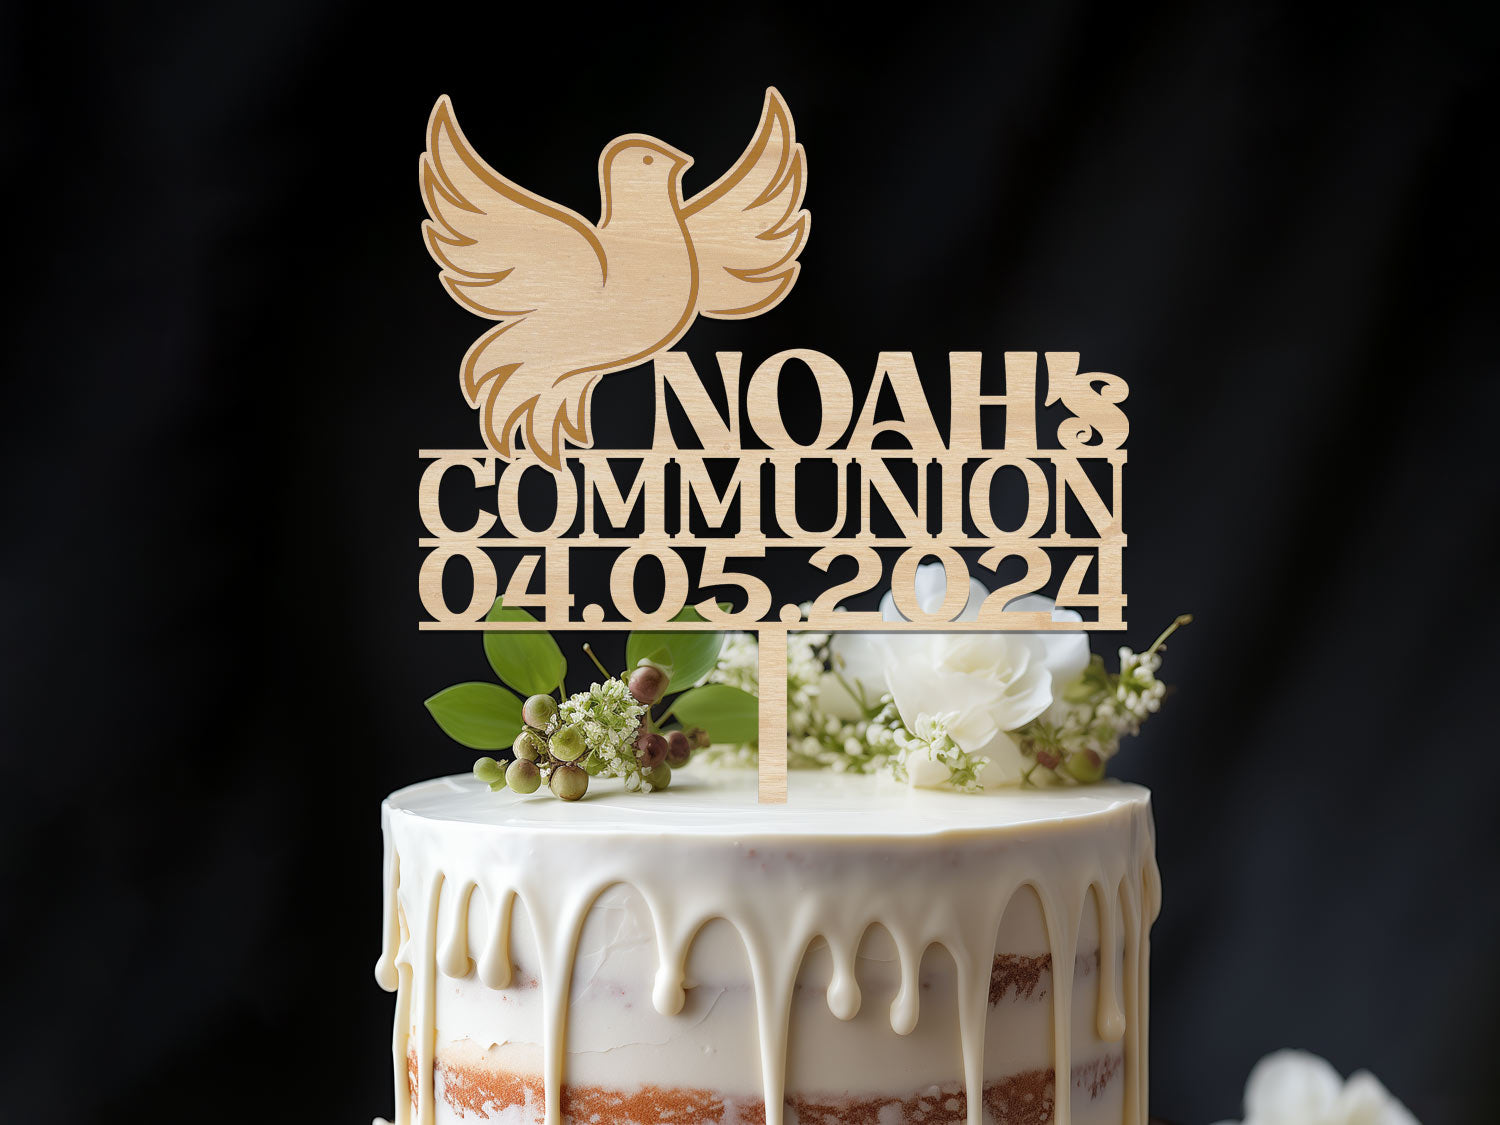 Communion Cake Topper with date Ireland Communion Cake Toppers Dublin